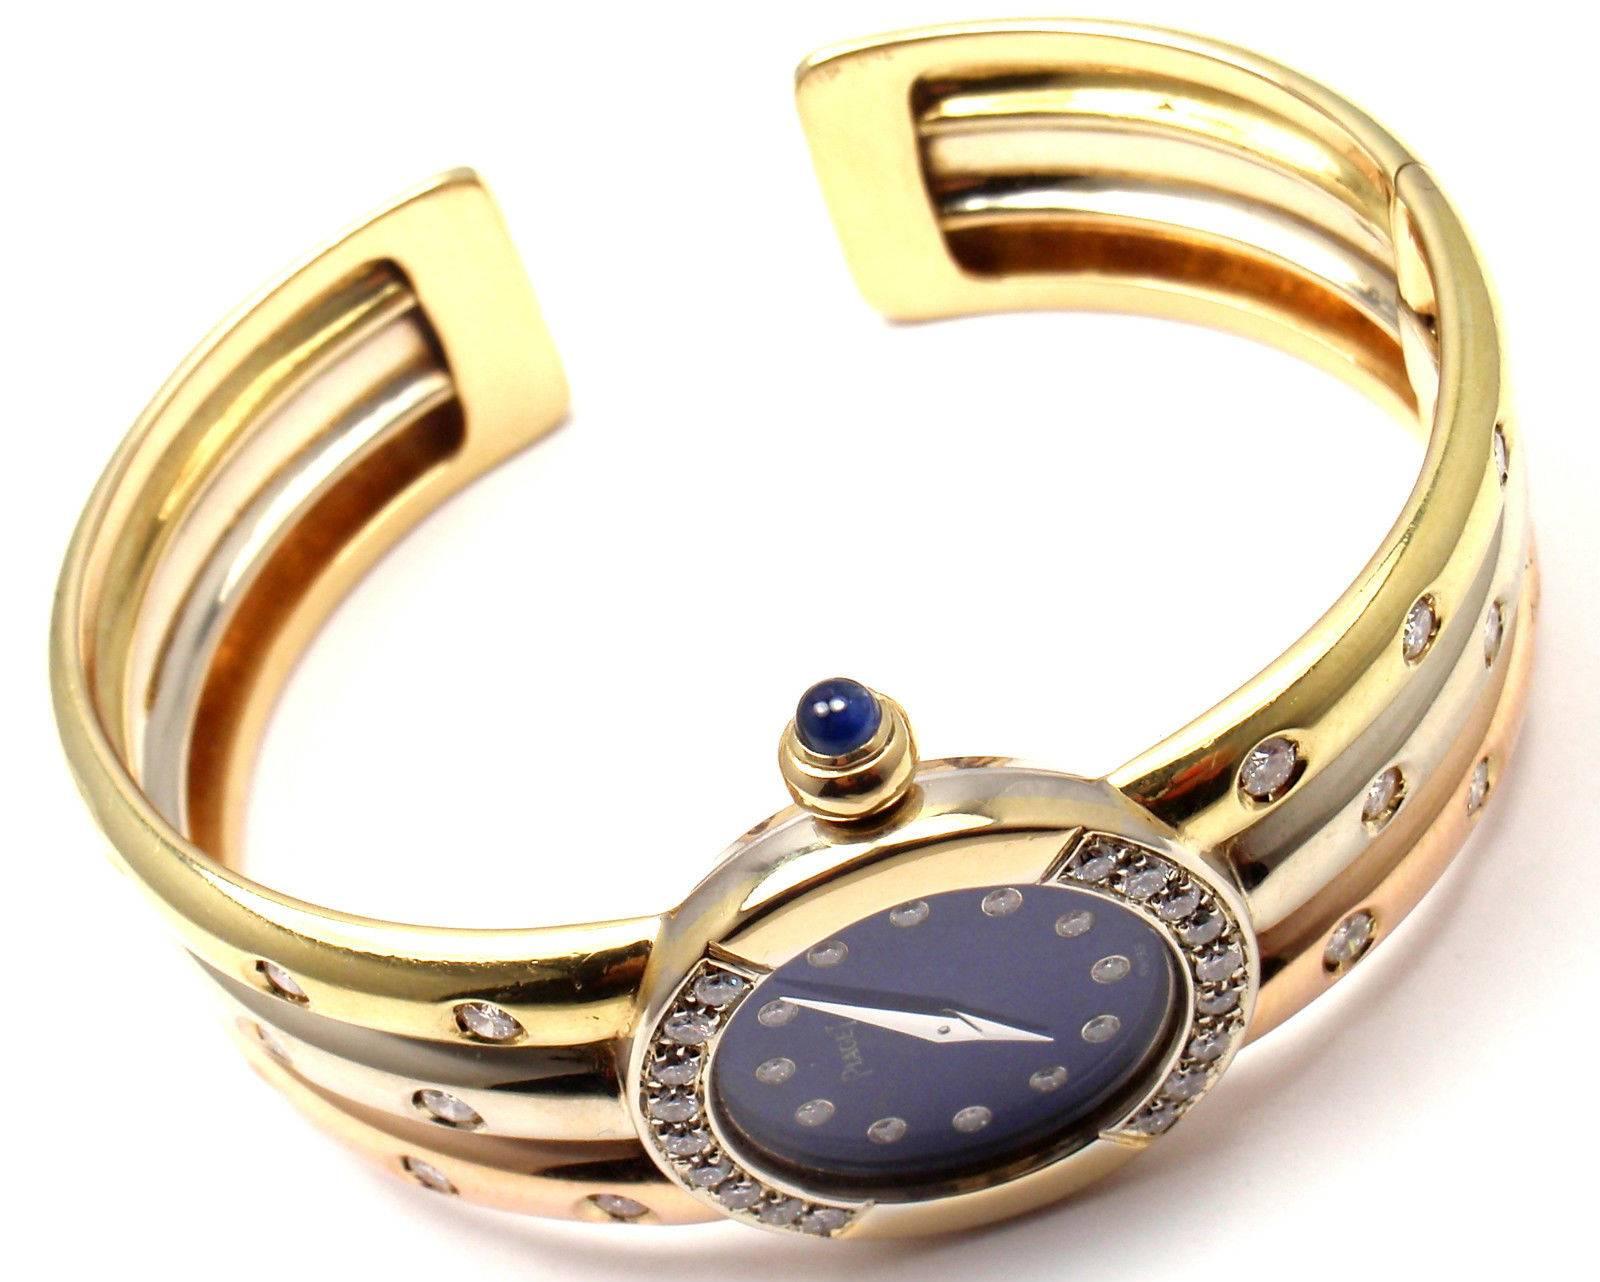 18k Tri-Color Gold Diamond Lapis Dial Bangle Bracelet Watch by Piaget.
With 46 round brilliant cut diamonds VS1 clarity, G color total weight approx. 1.5ct
This watch comes with Piaget box.

Details:
Movement Type:  Mechanical Manual Wind
Case